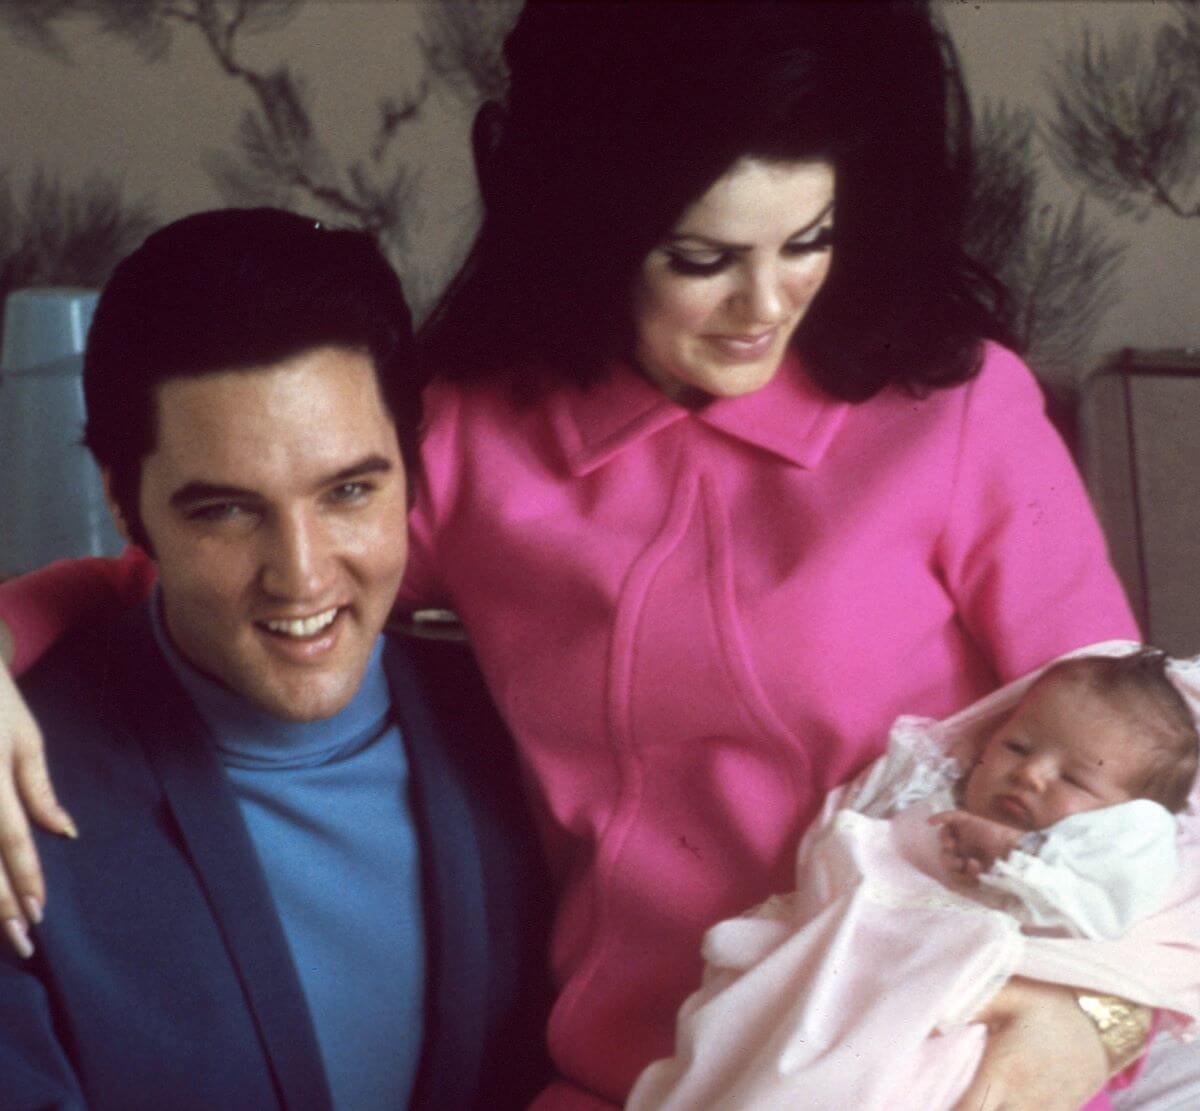 Priscilla Presley sits on Elvis' lap and holds Lisa Marie Presley. She looks down at Lisa Marie.